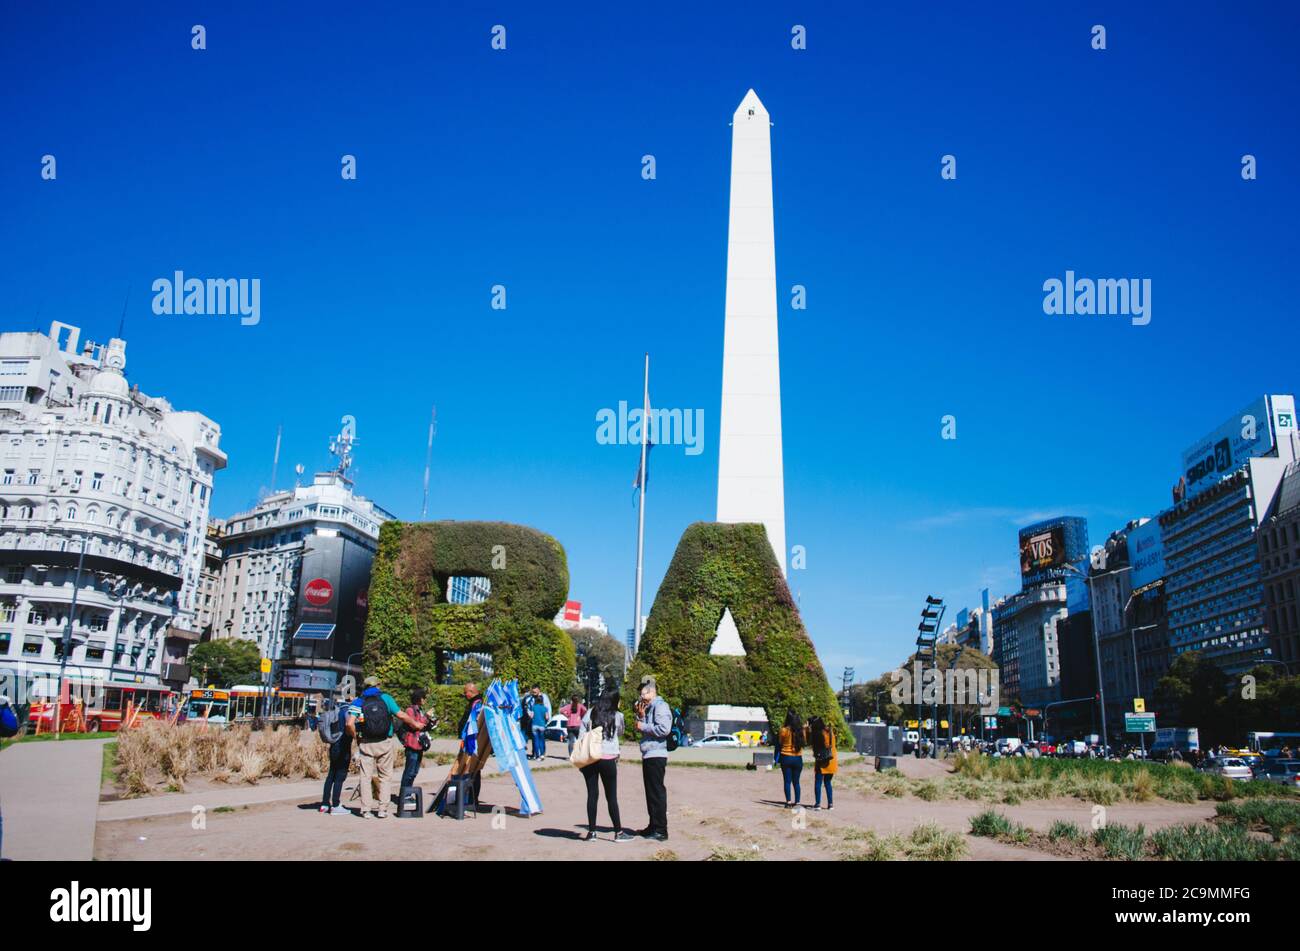 Buenos Aires, Argentina - September 4, 2018: Tourists in front of the famous argentinian Obelisk taking selfies and group pictures. Stock Photo